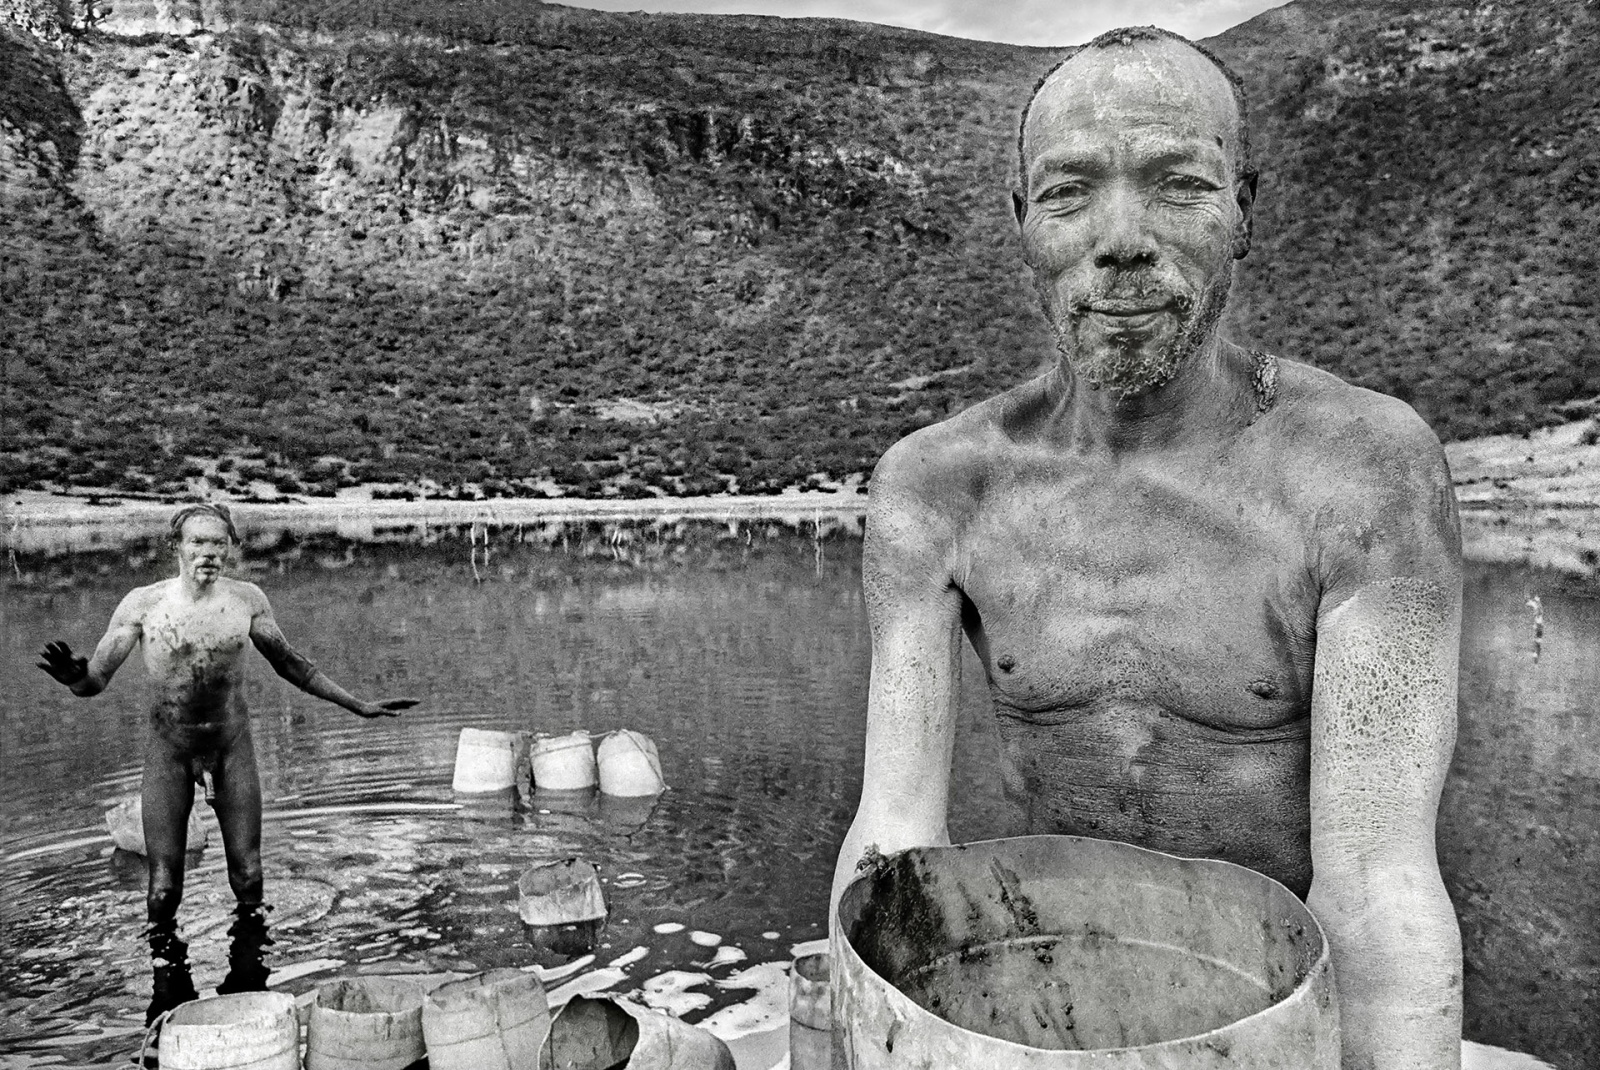 Dubuluk, Ethiopia 1996  - collecting salt from the lake in the crater of the extinct volcano of El Sod
analogic photo